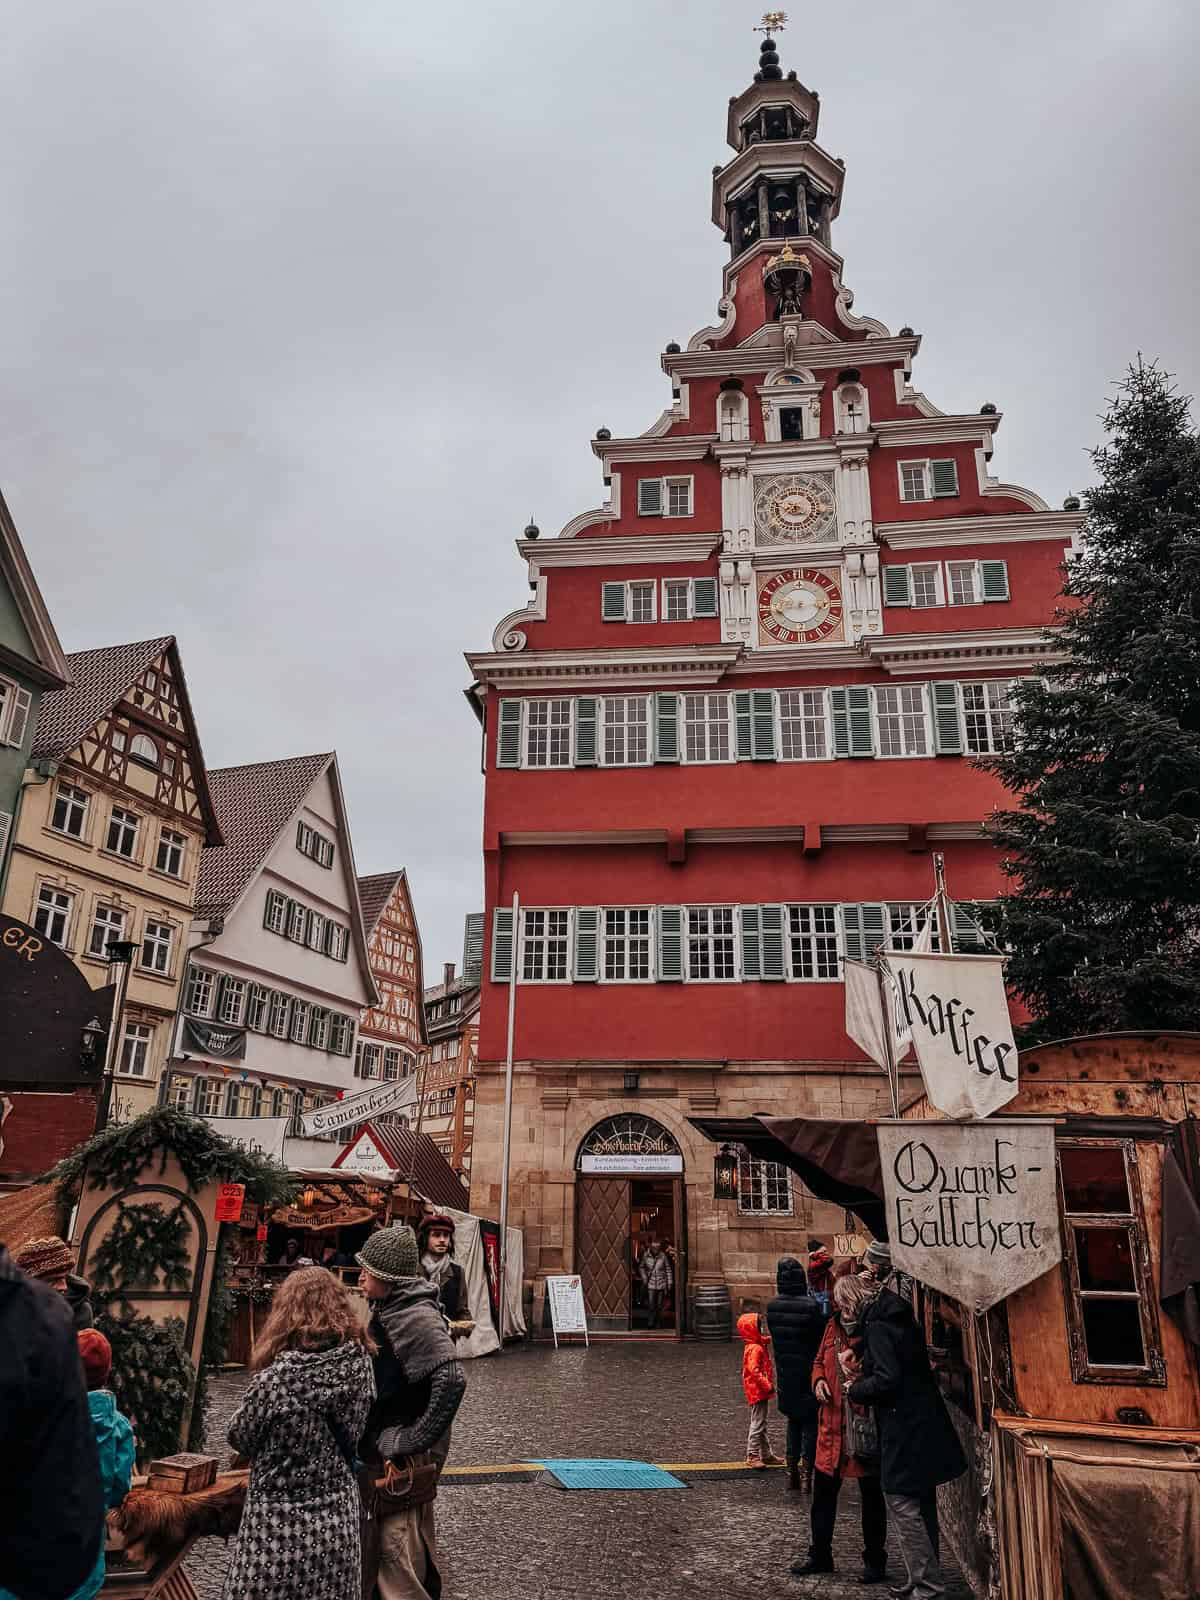 Esslingen's old town hall, a striking red building with a prominent clock tower, surrounded by timber-framed houses and a small market setup.